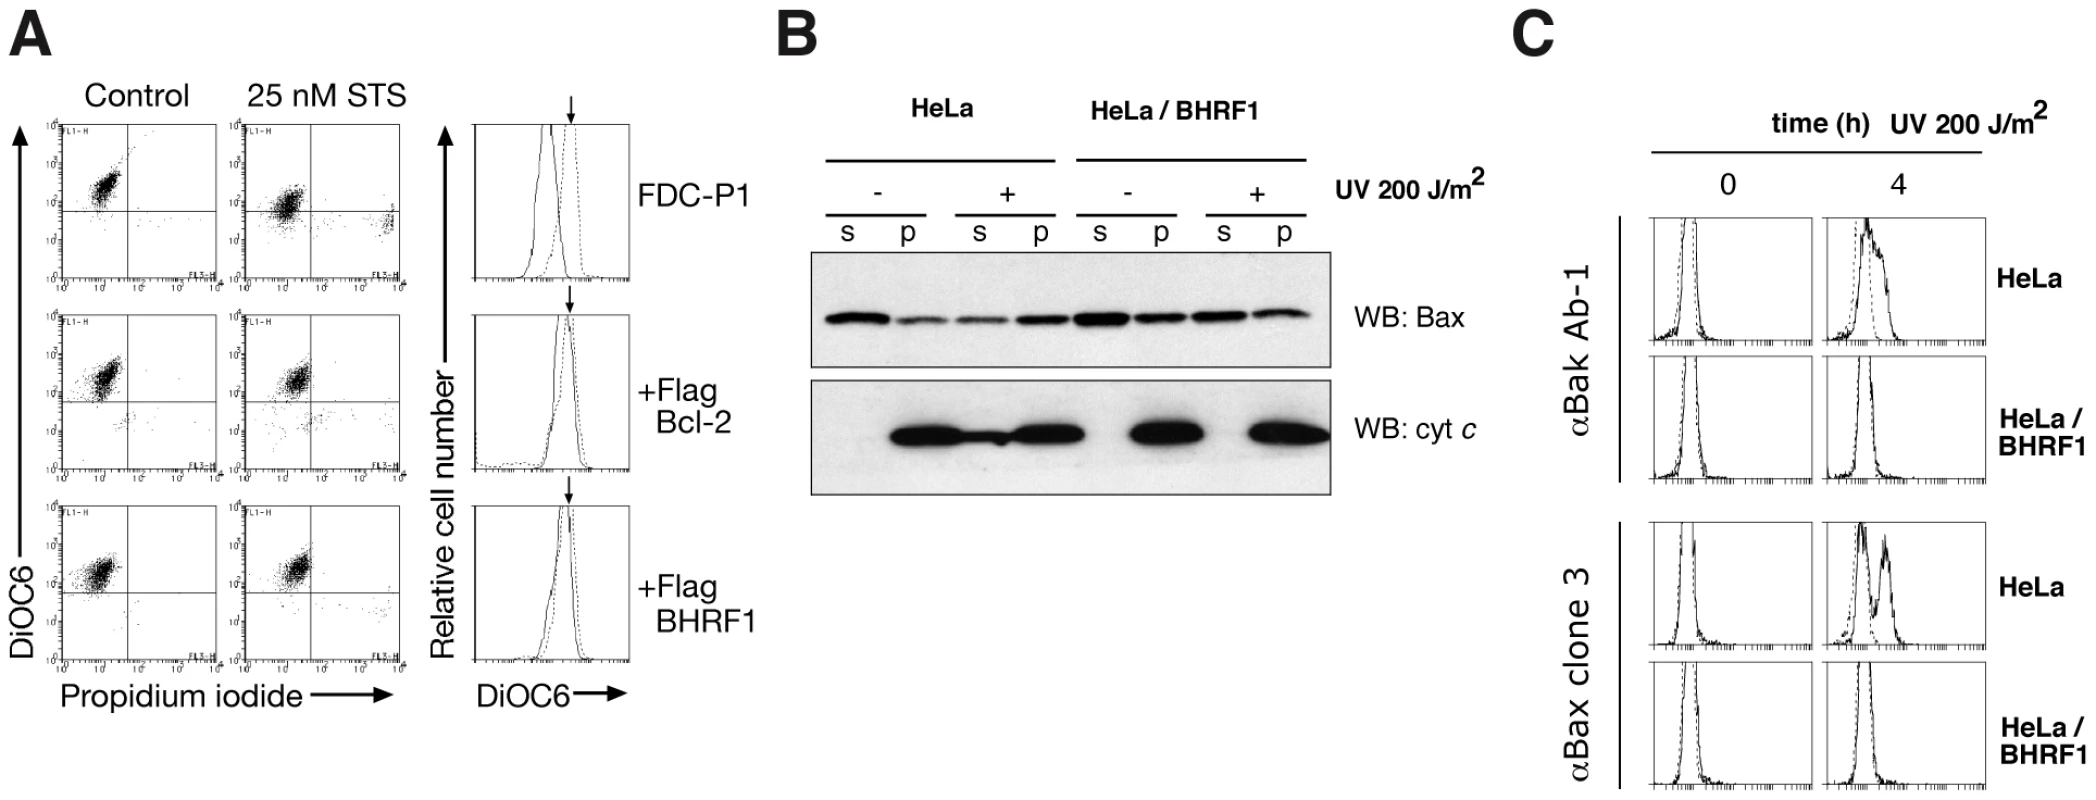 BHRF1 inhibits loss of mitochondrial transmembrane potential and Bax/Bak activation.